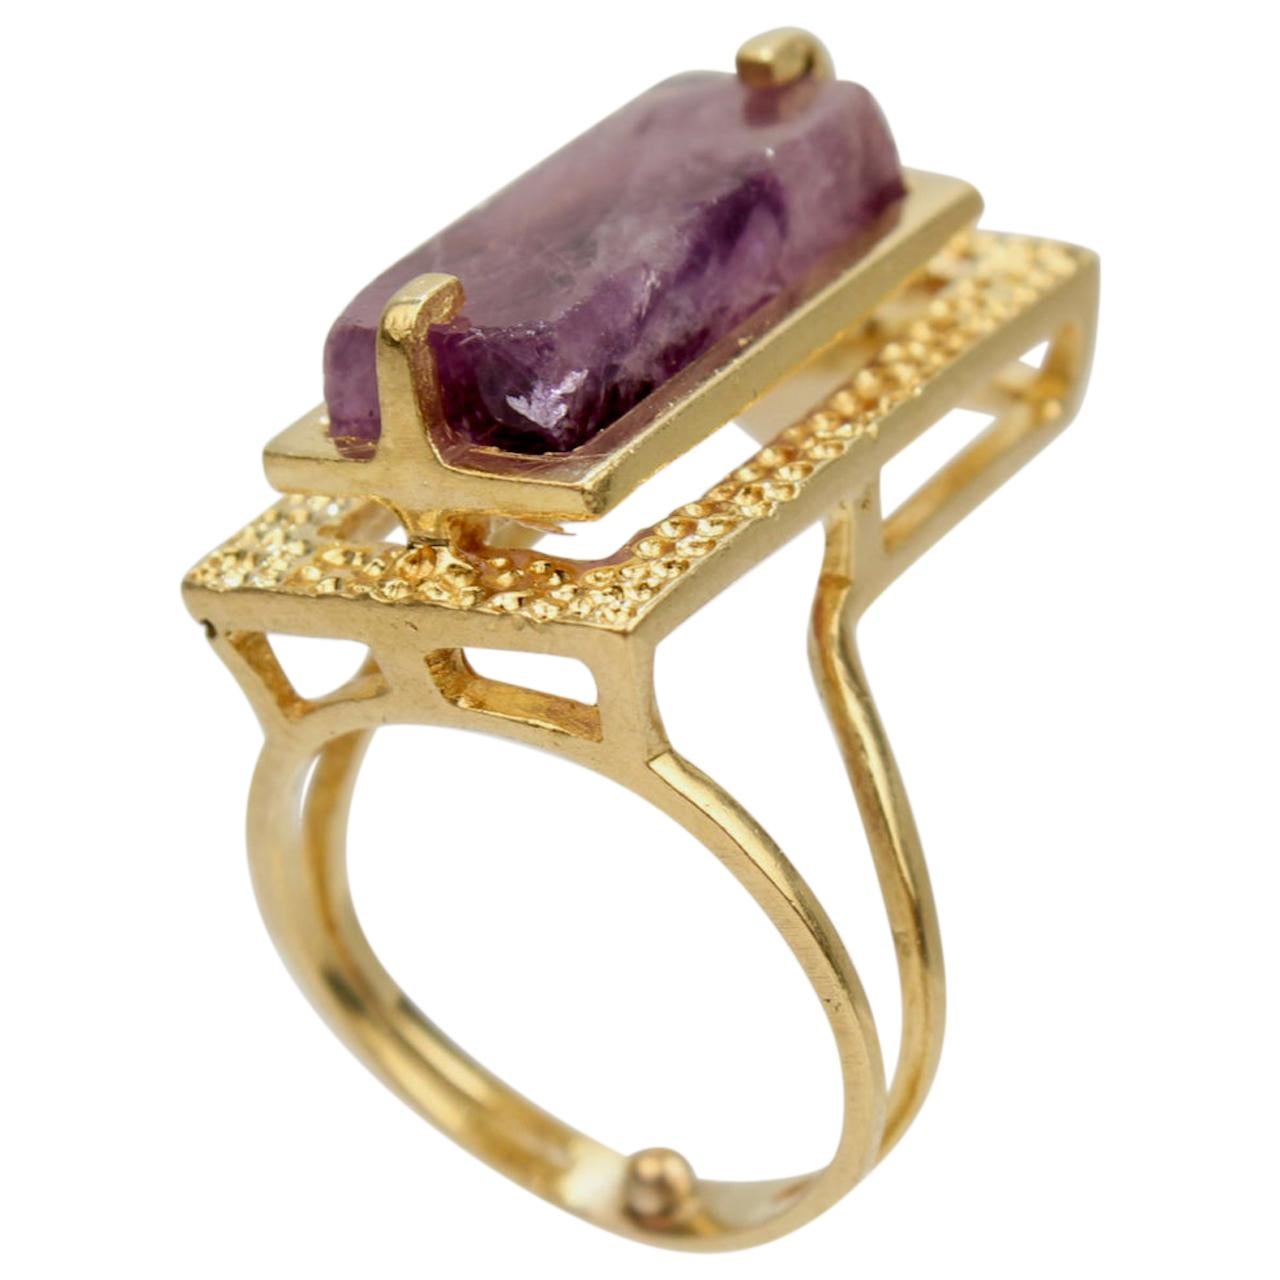 Modernist Asymmetrical 18k Gold and Rough Cut Amethyst Gemstone Cocktail Ring For Sale